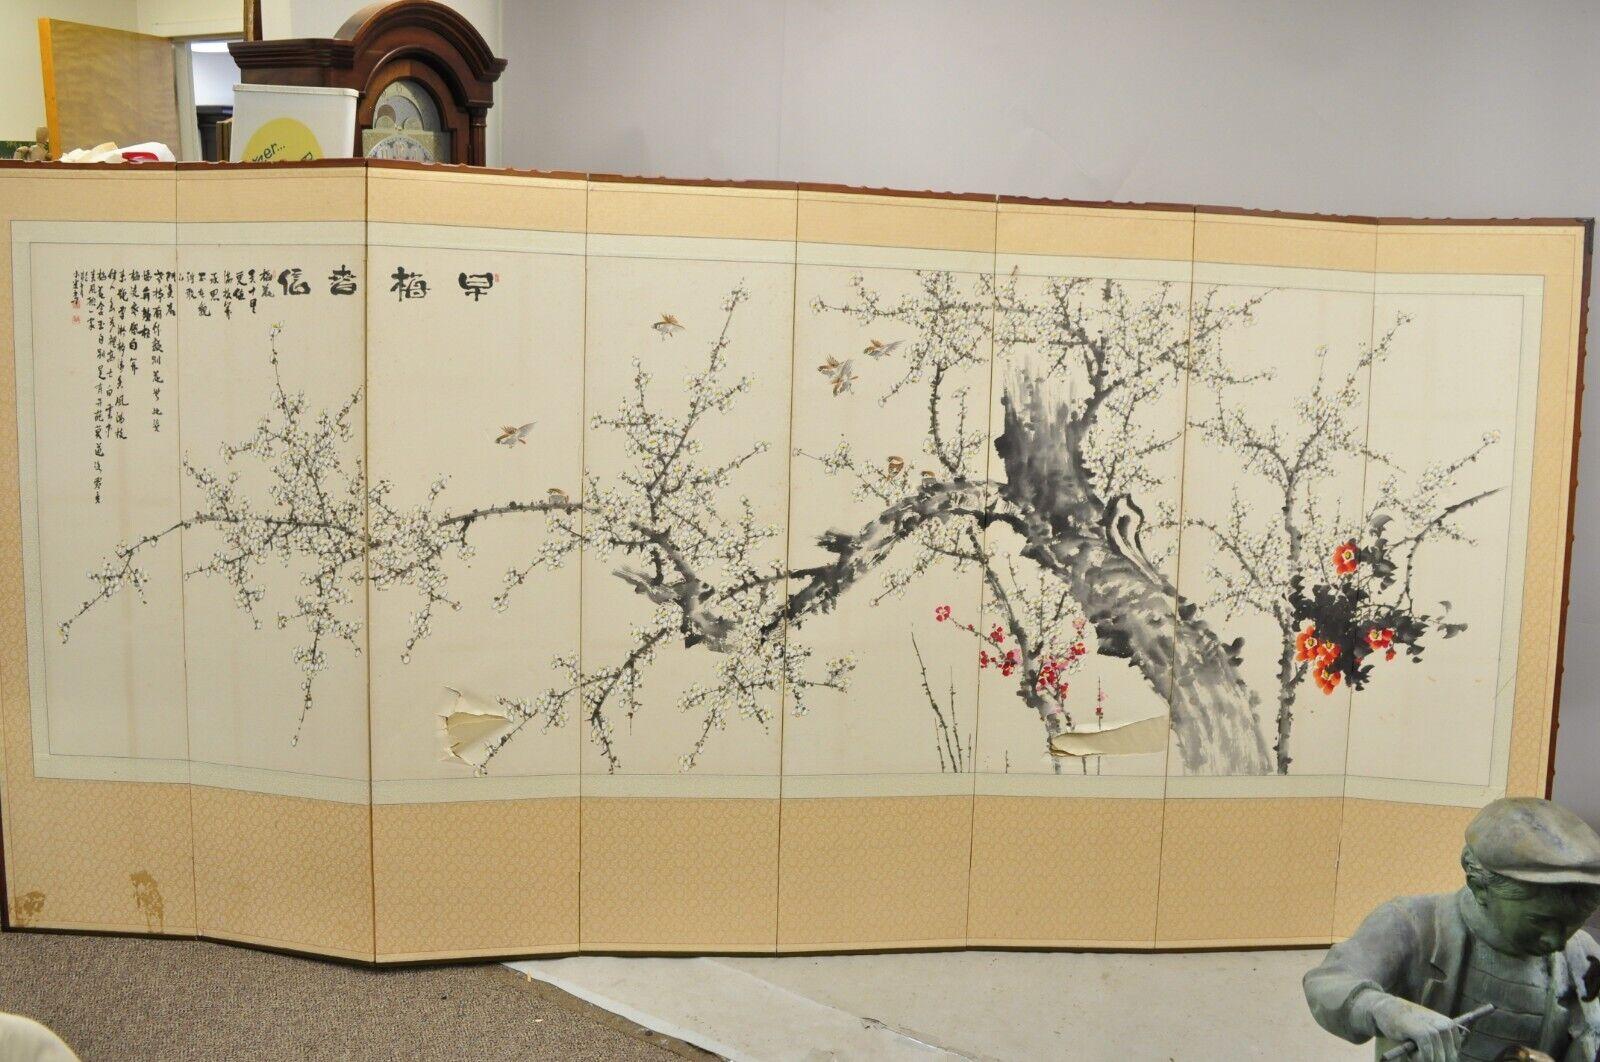 Large Vintage 8 Panel Japanese Cherry Blossom Painting Byobu Folding Screen Room Divider. Item features a double sided screen, cherry blossom watercolor painting print(?), large impressive size, faux bamboo wooden frame. Circa Mid 20th Century.